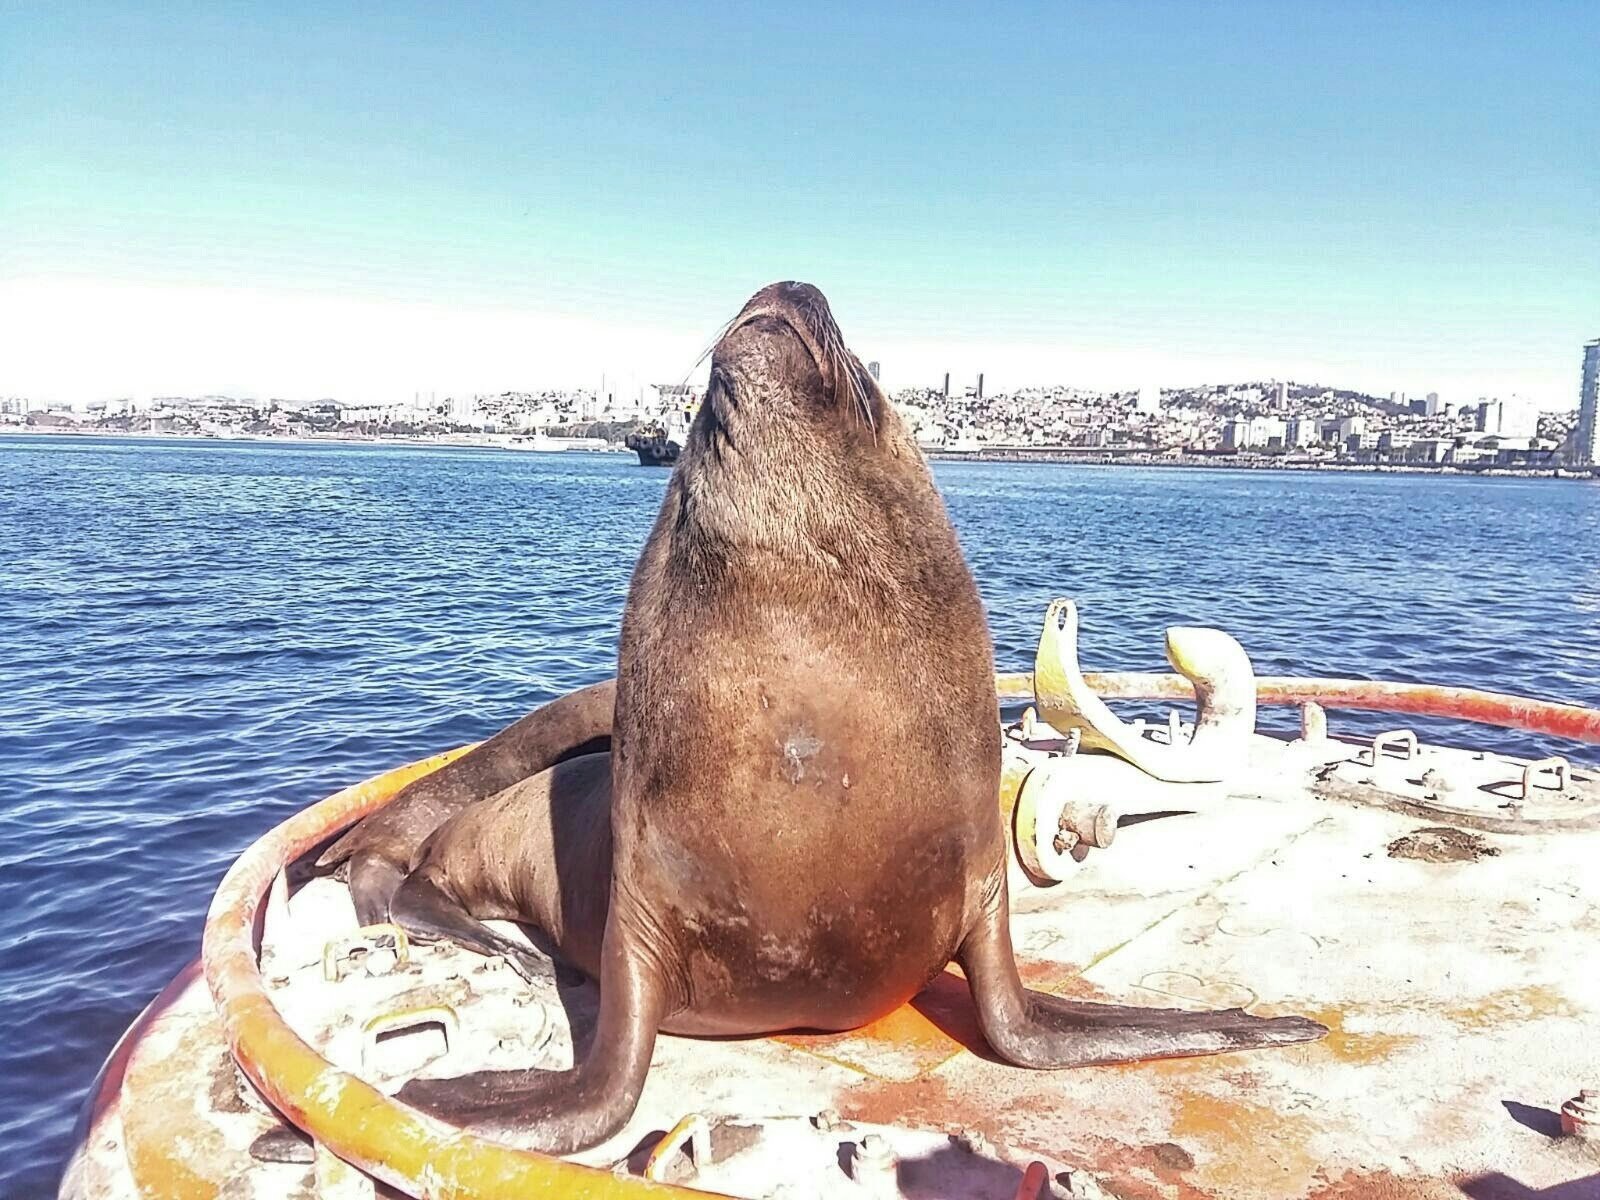 <img src="images/" width="800" height="600" alt="valparaíso - looks like seal is releasing a new album 775488549 - Chile: Valparaíso, Mountains, Murals and Music.">